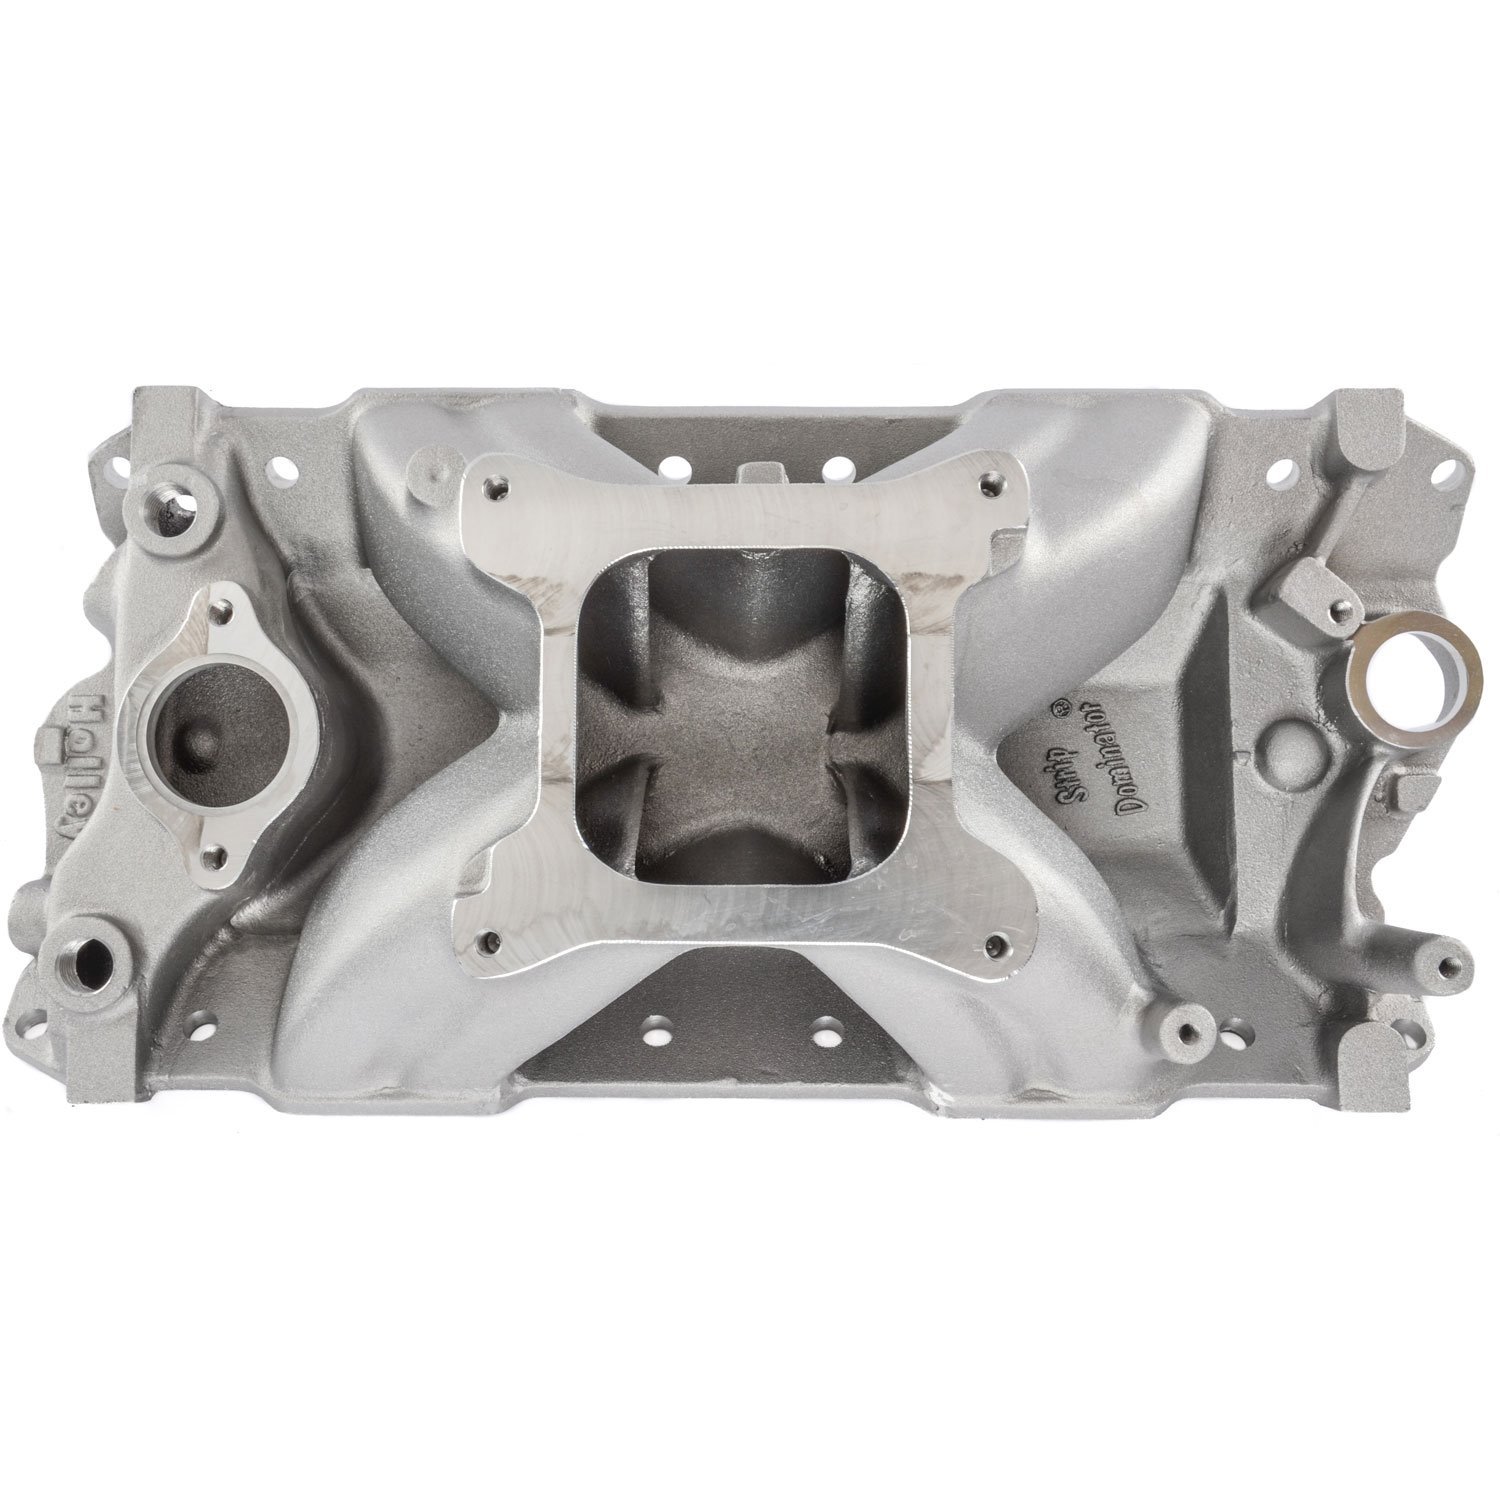 300-25 Strip Dominator Intake Manifold for Small Block Chevy